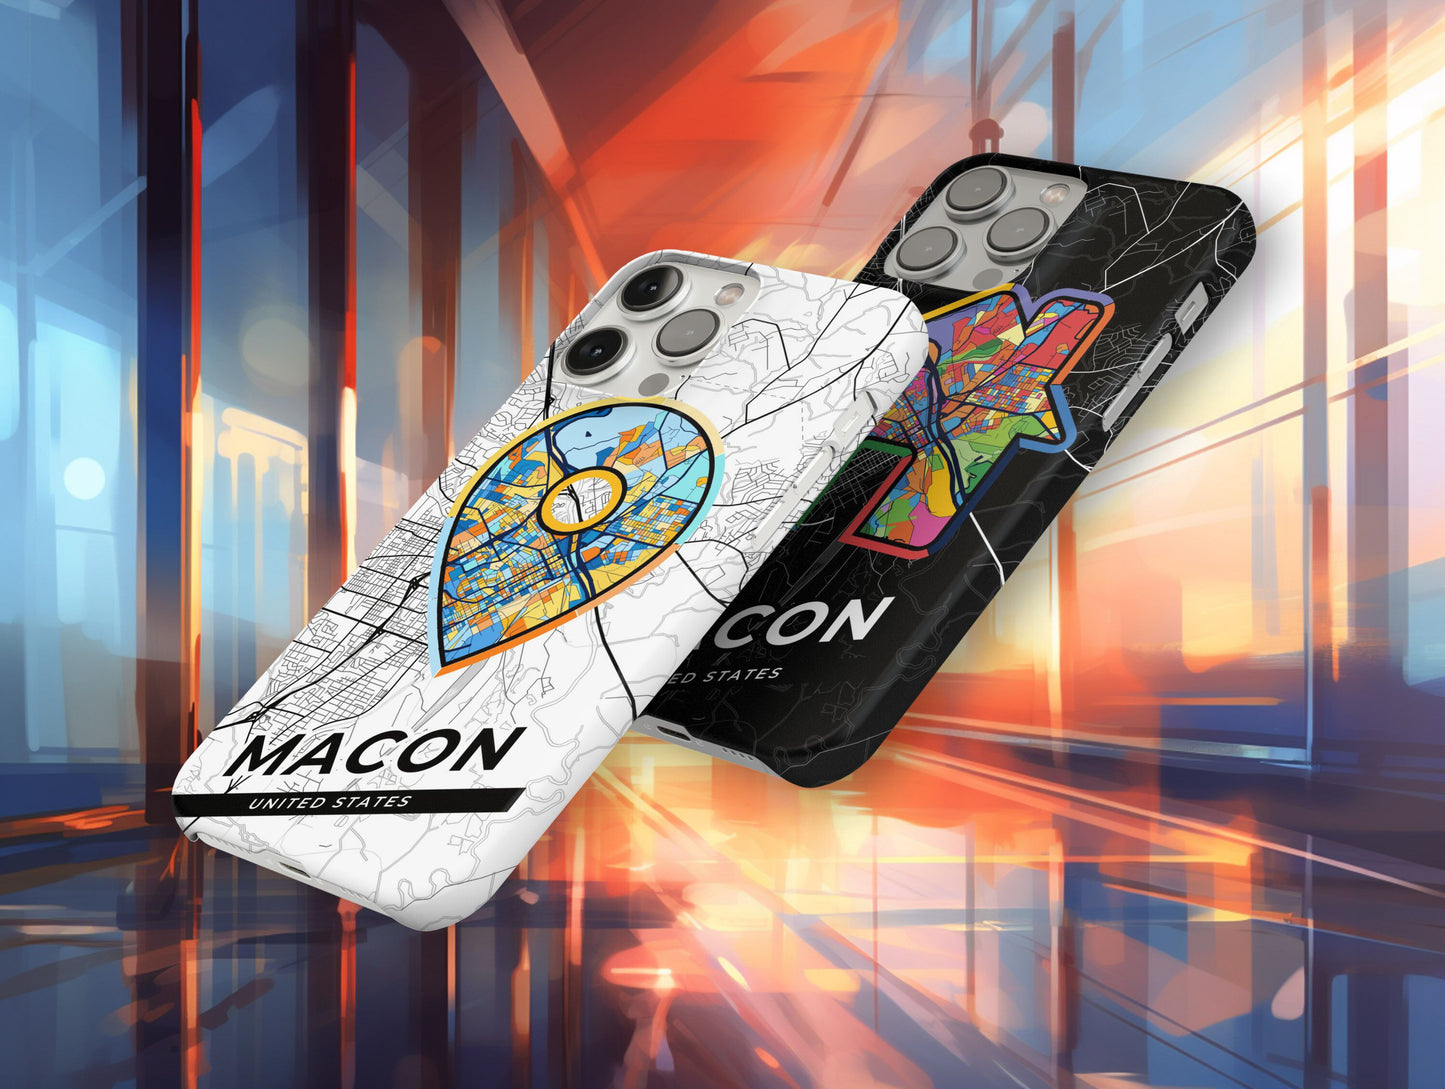 Macon Georgia slim phone case with colorful icon. Birthday, wedding or housewarming gift. Couple match cases.